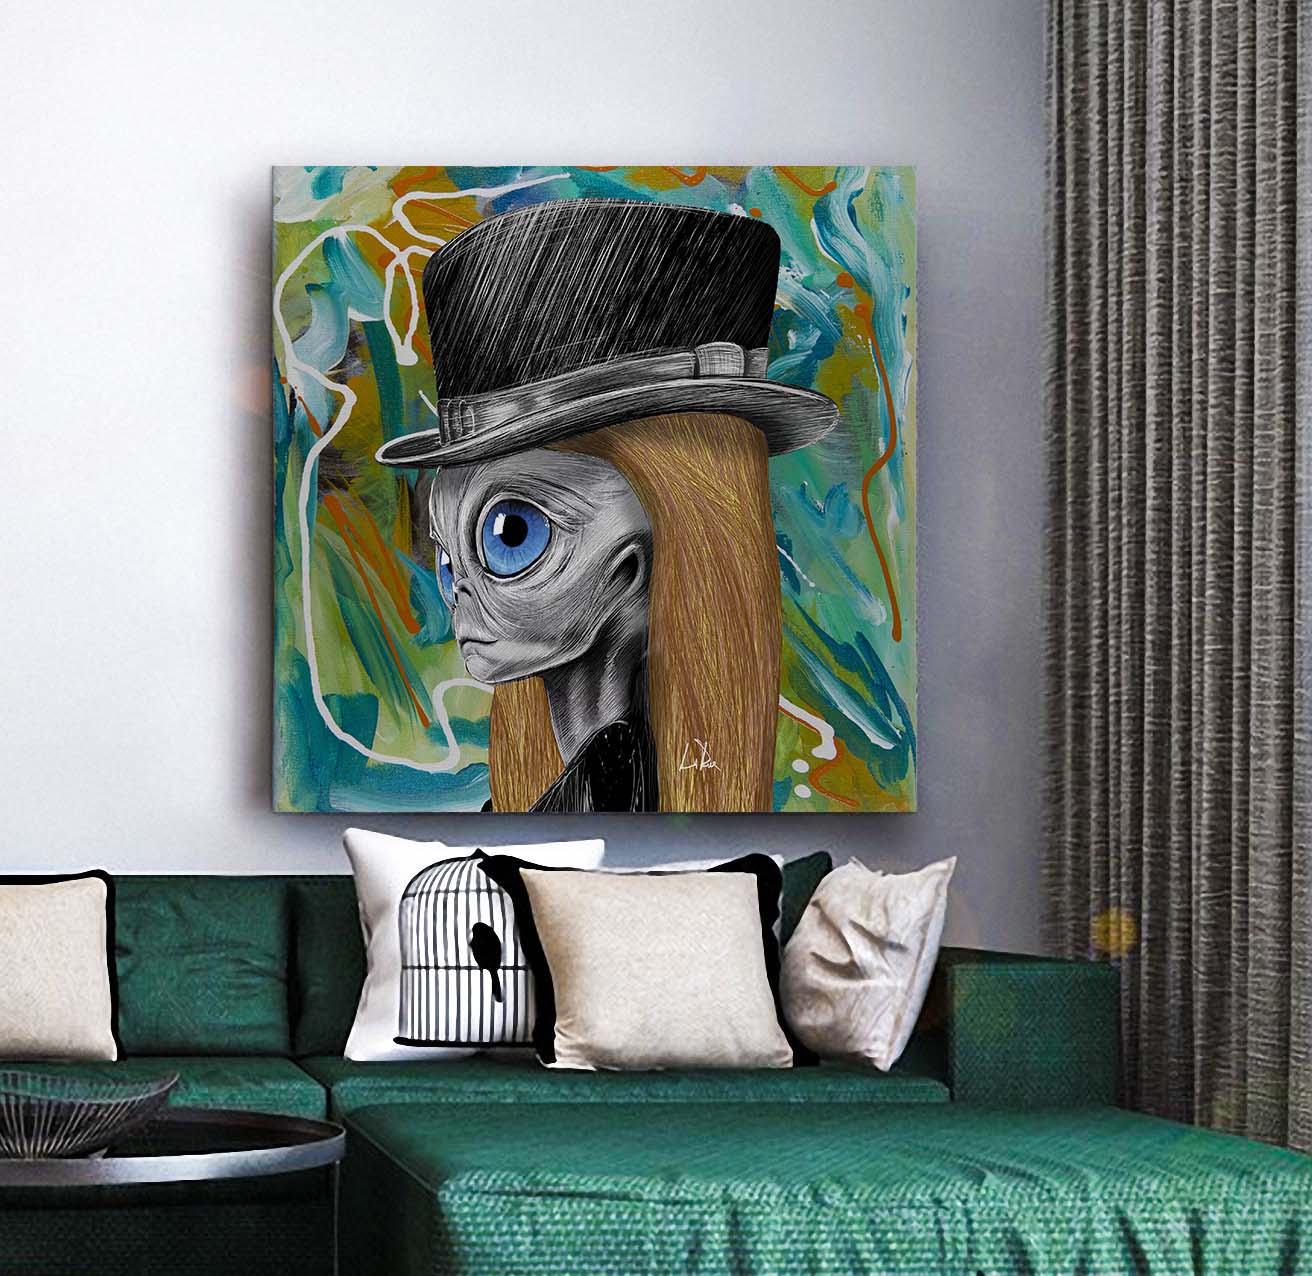 Lady Grey art by Doug LaRue on a living room wall over a green couch